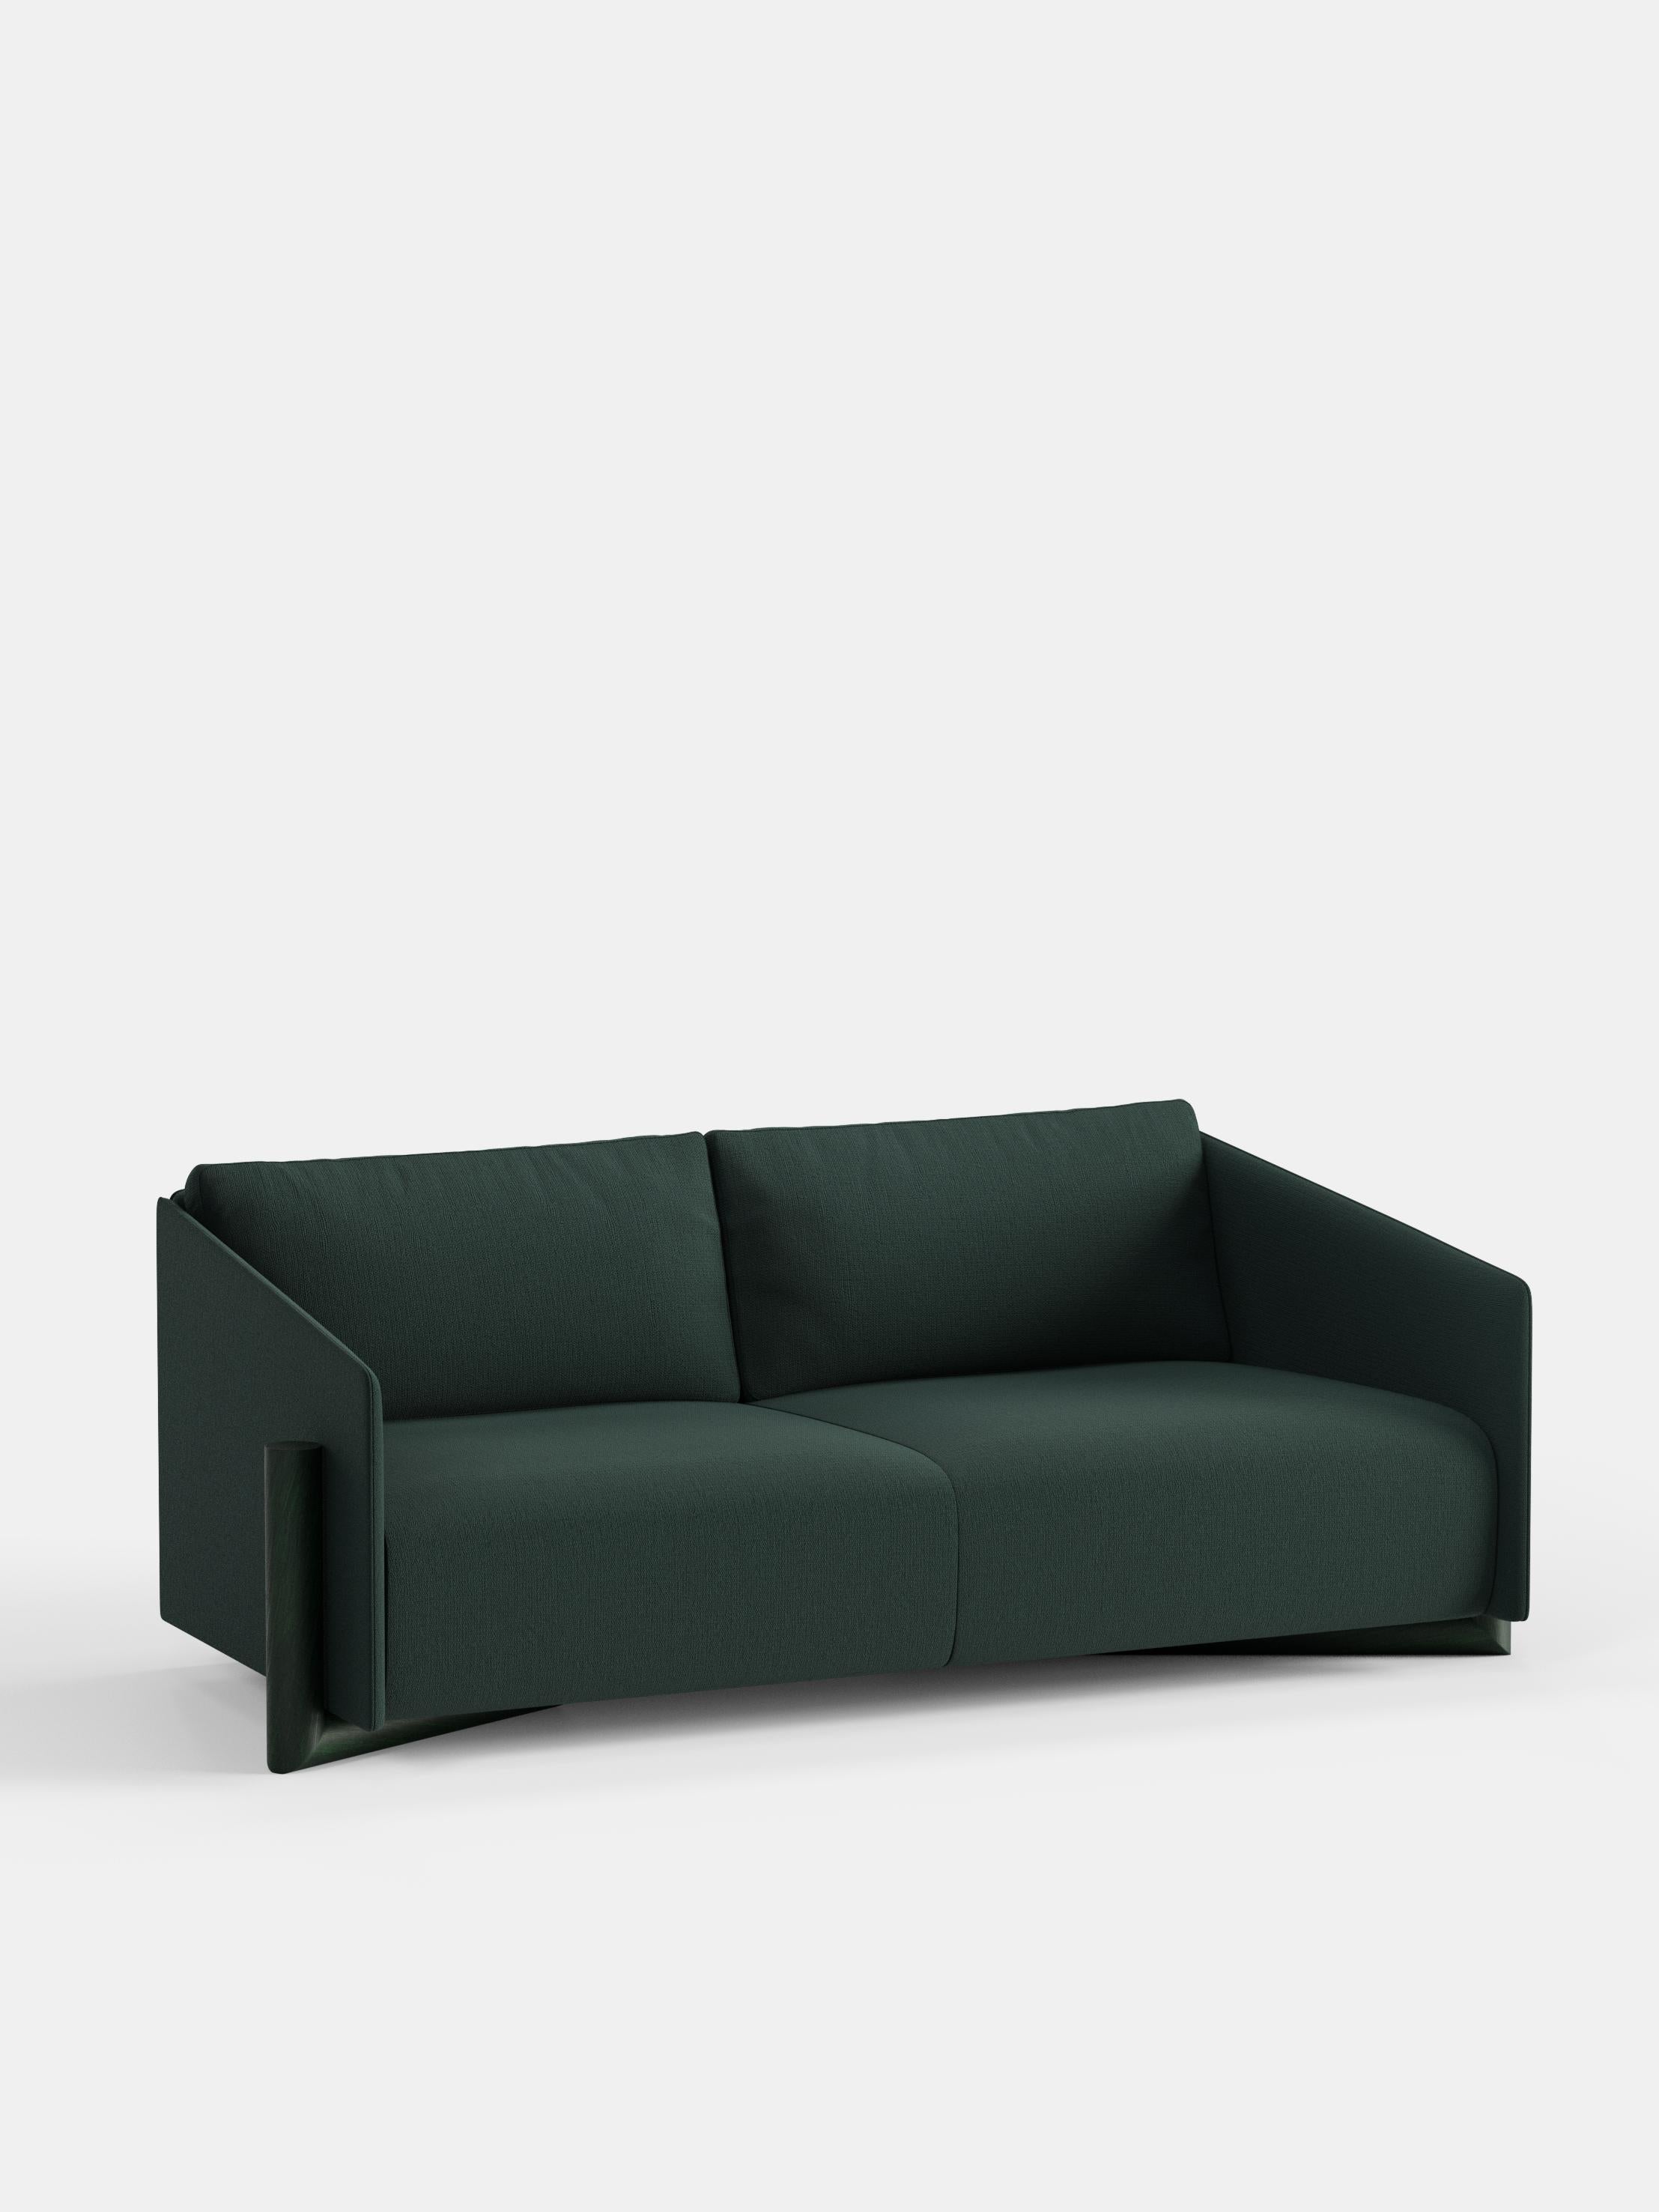 Green Timber 3 Seater Sofa by Kann Design
Dimensions: D 104.5 x W 200 x H 75 cm.
Materials: Solid wood, elastic belts, HR foam, fabric upholstery Kvadrat Vidar 1062 (94% wool, 6% nylon).
Available in other fabrics.

The strong presence of textile in